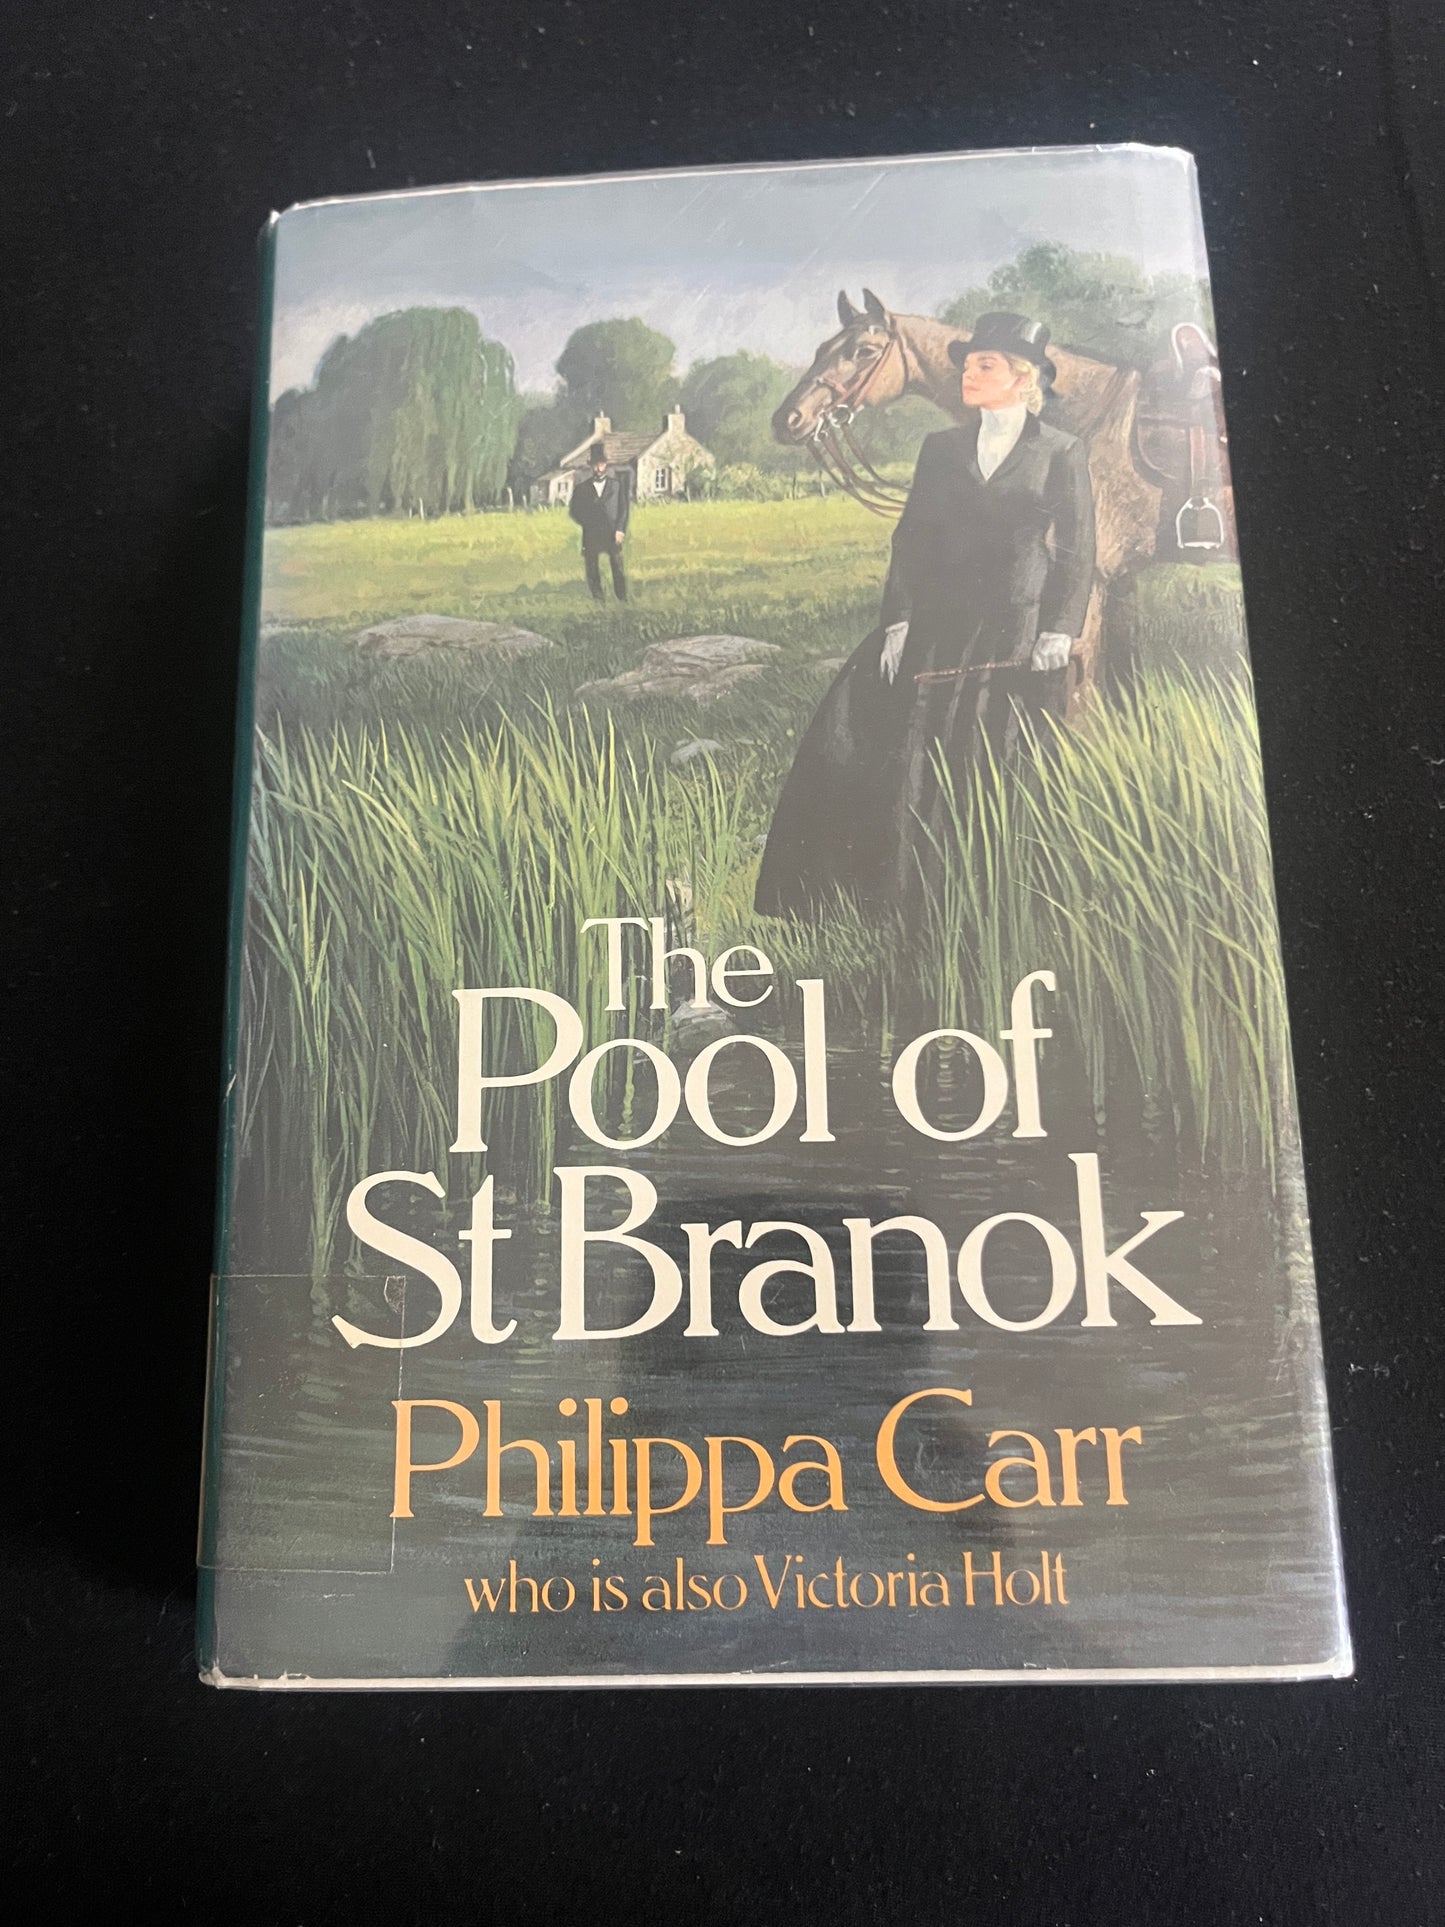 THE POOL OF ST BRANOK by Philippa Carr